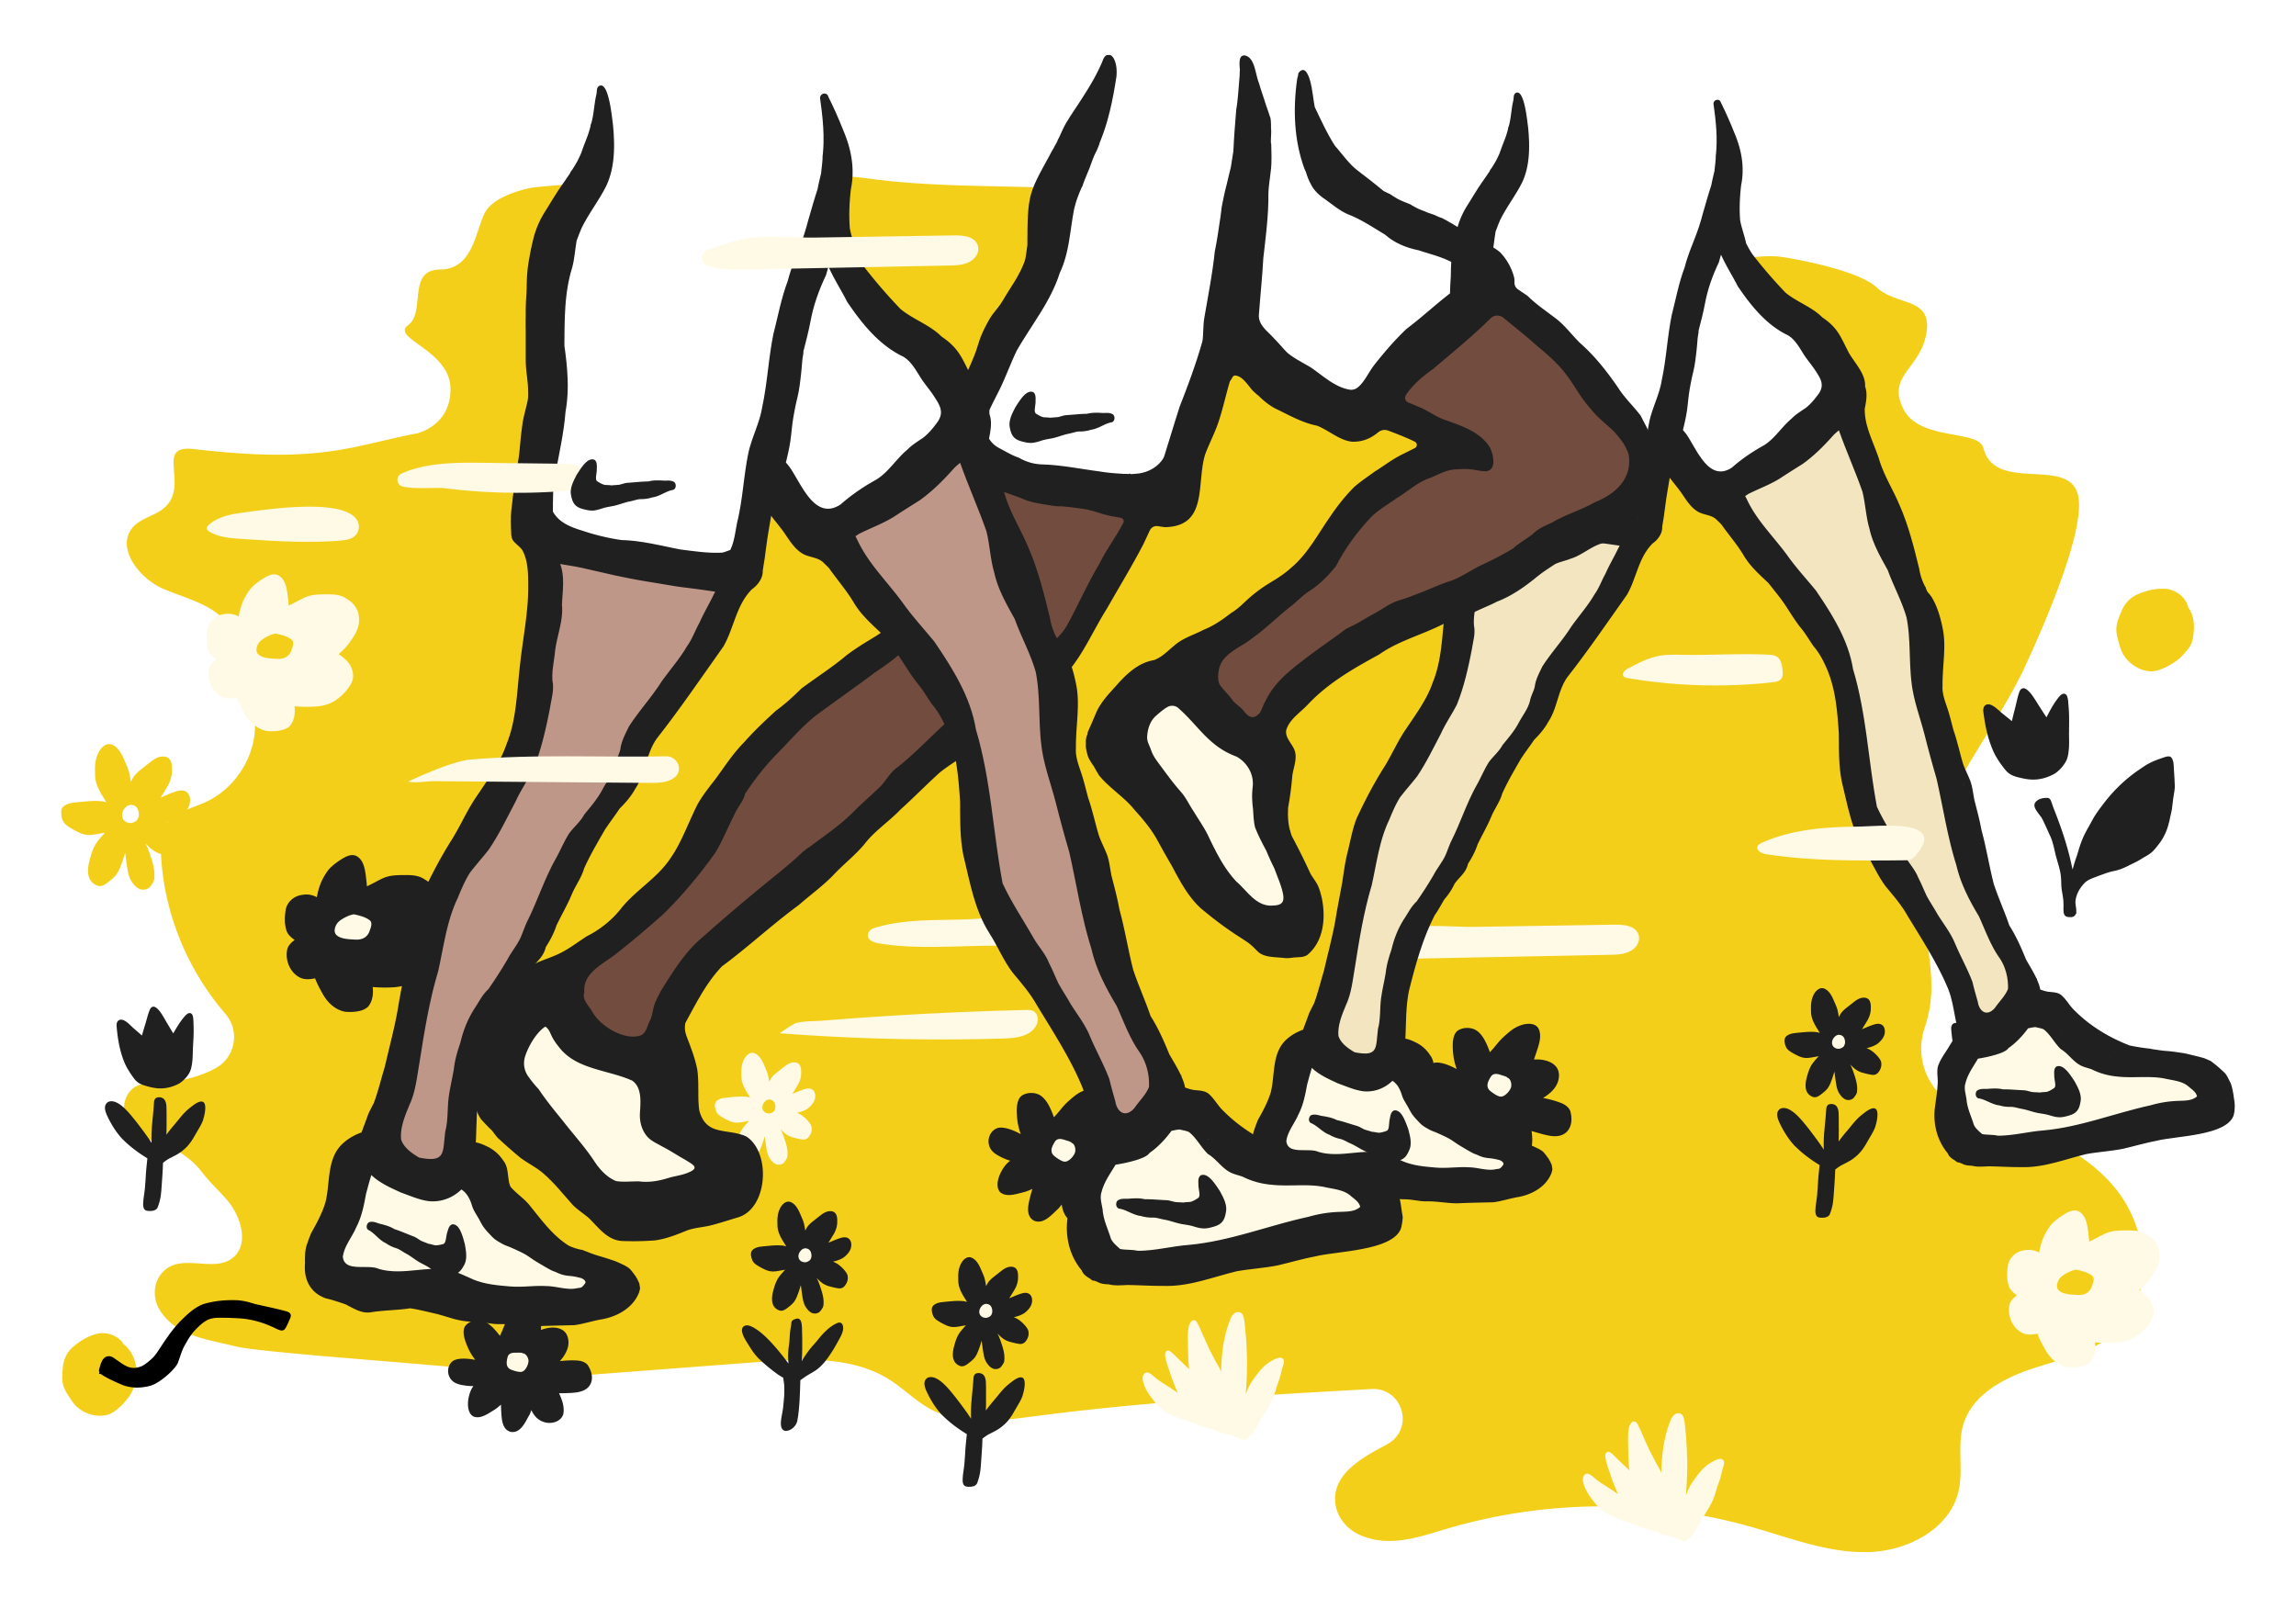 Black, white and yellow illustration of walkers and runners